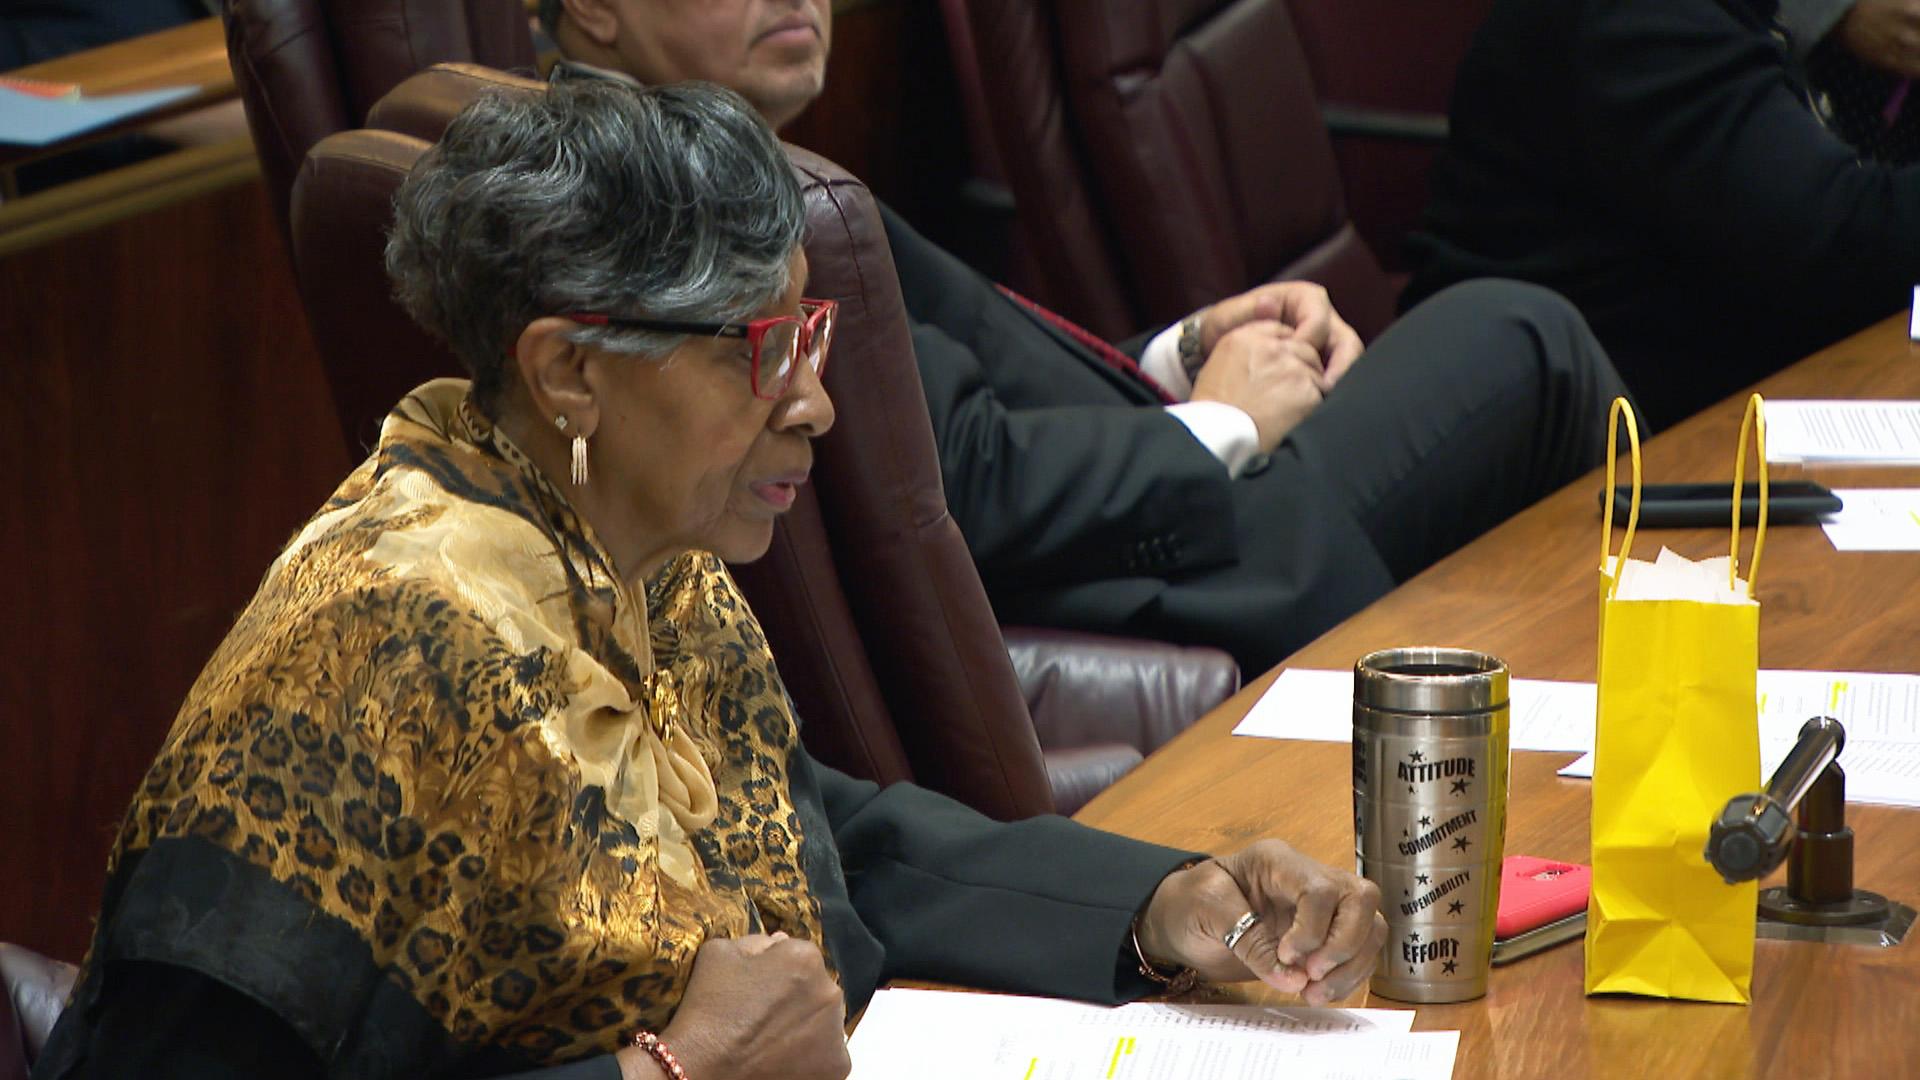 A file photo shows 34th Ward Ald. Carrie Austin at a Chicago City Council meeting. (WTTW News)